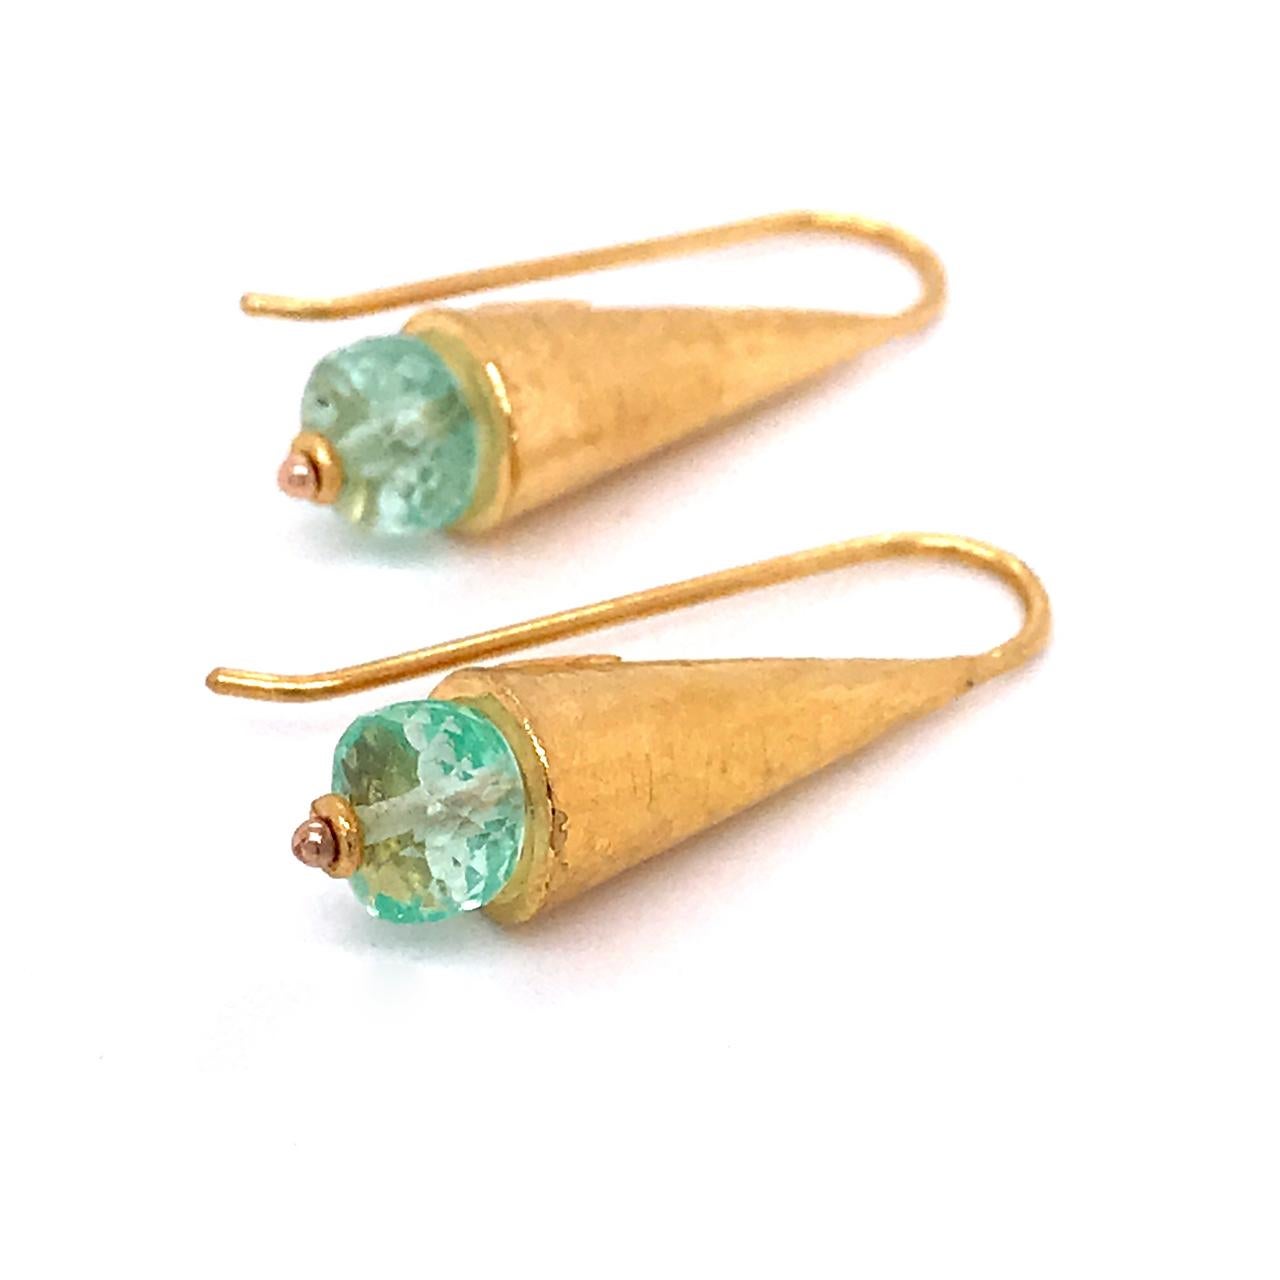 A very fine pair of high-karat gold and emerald ARA earrings.

With a wonderful Egyptian Revival or Ancient Mediterranean feel, the earrings consist of cone-shaped hand-hammered drops mounted with faceted rondelle-cut emerald beads.   

Marked ARA